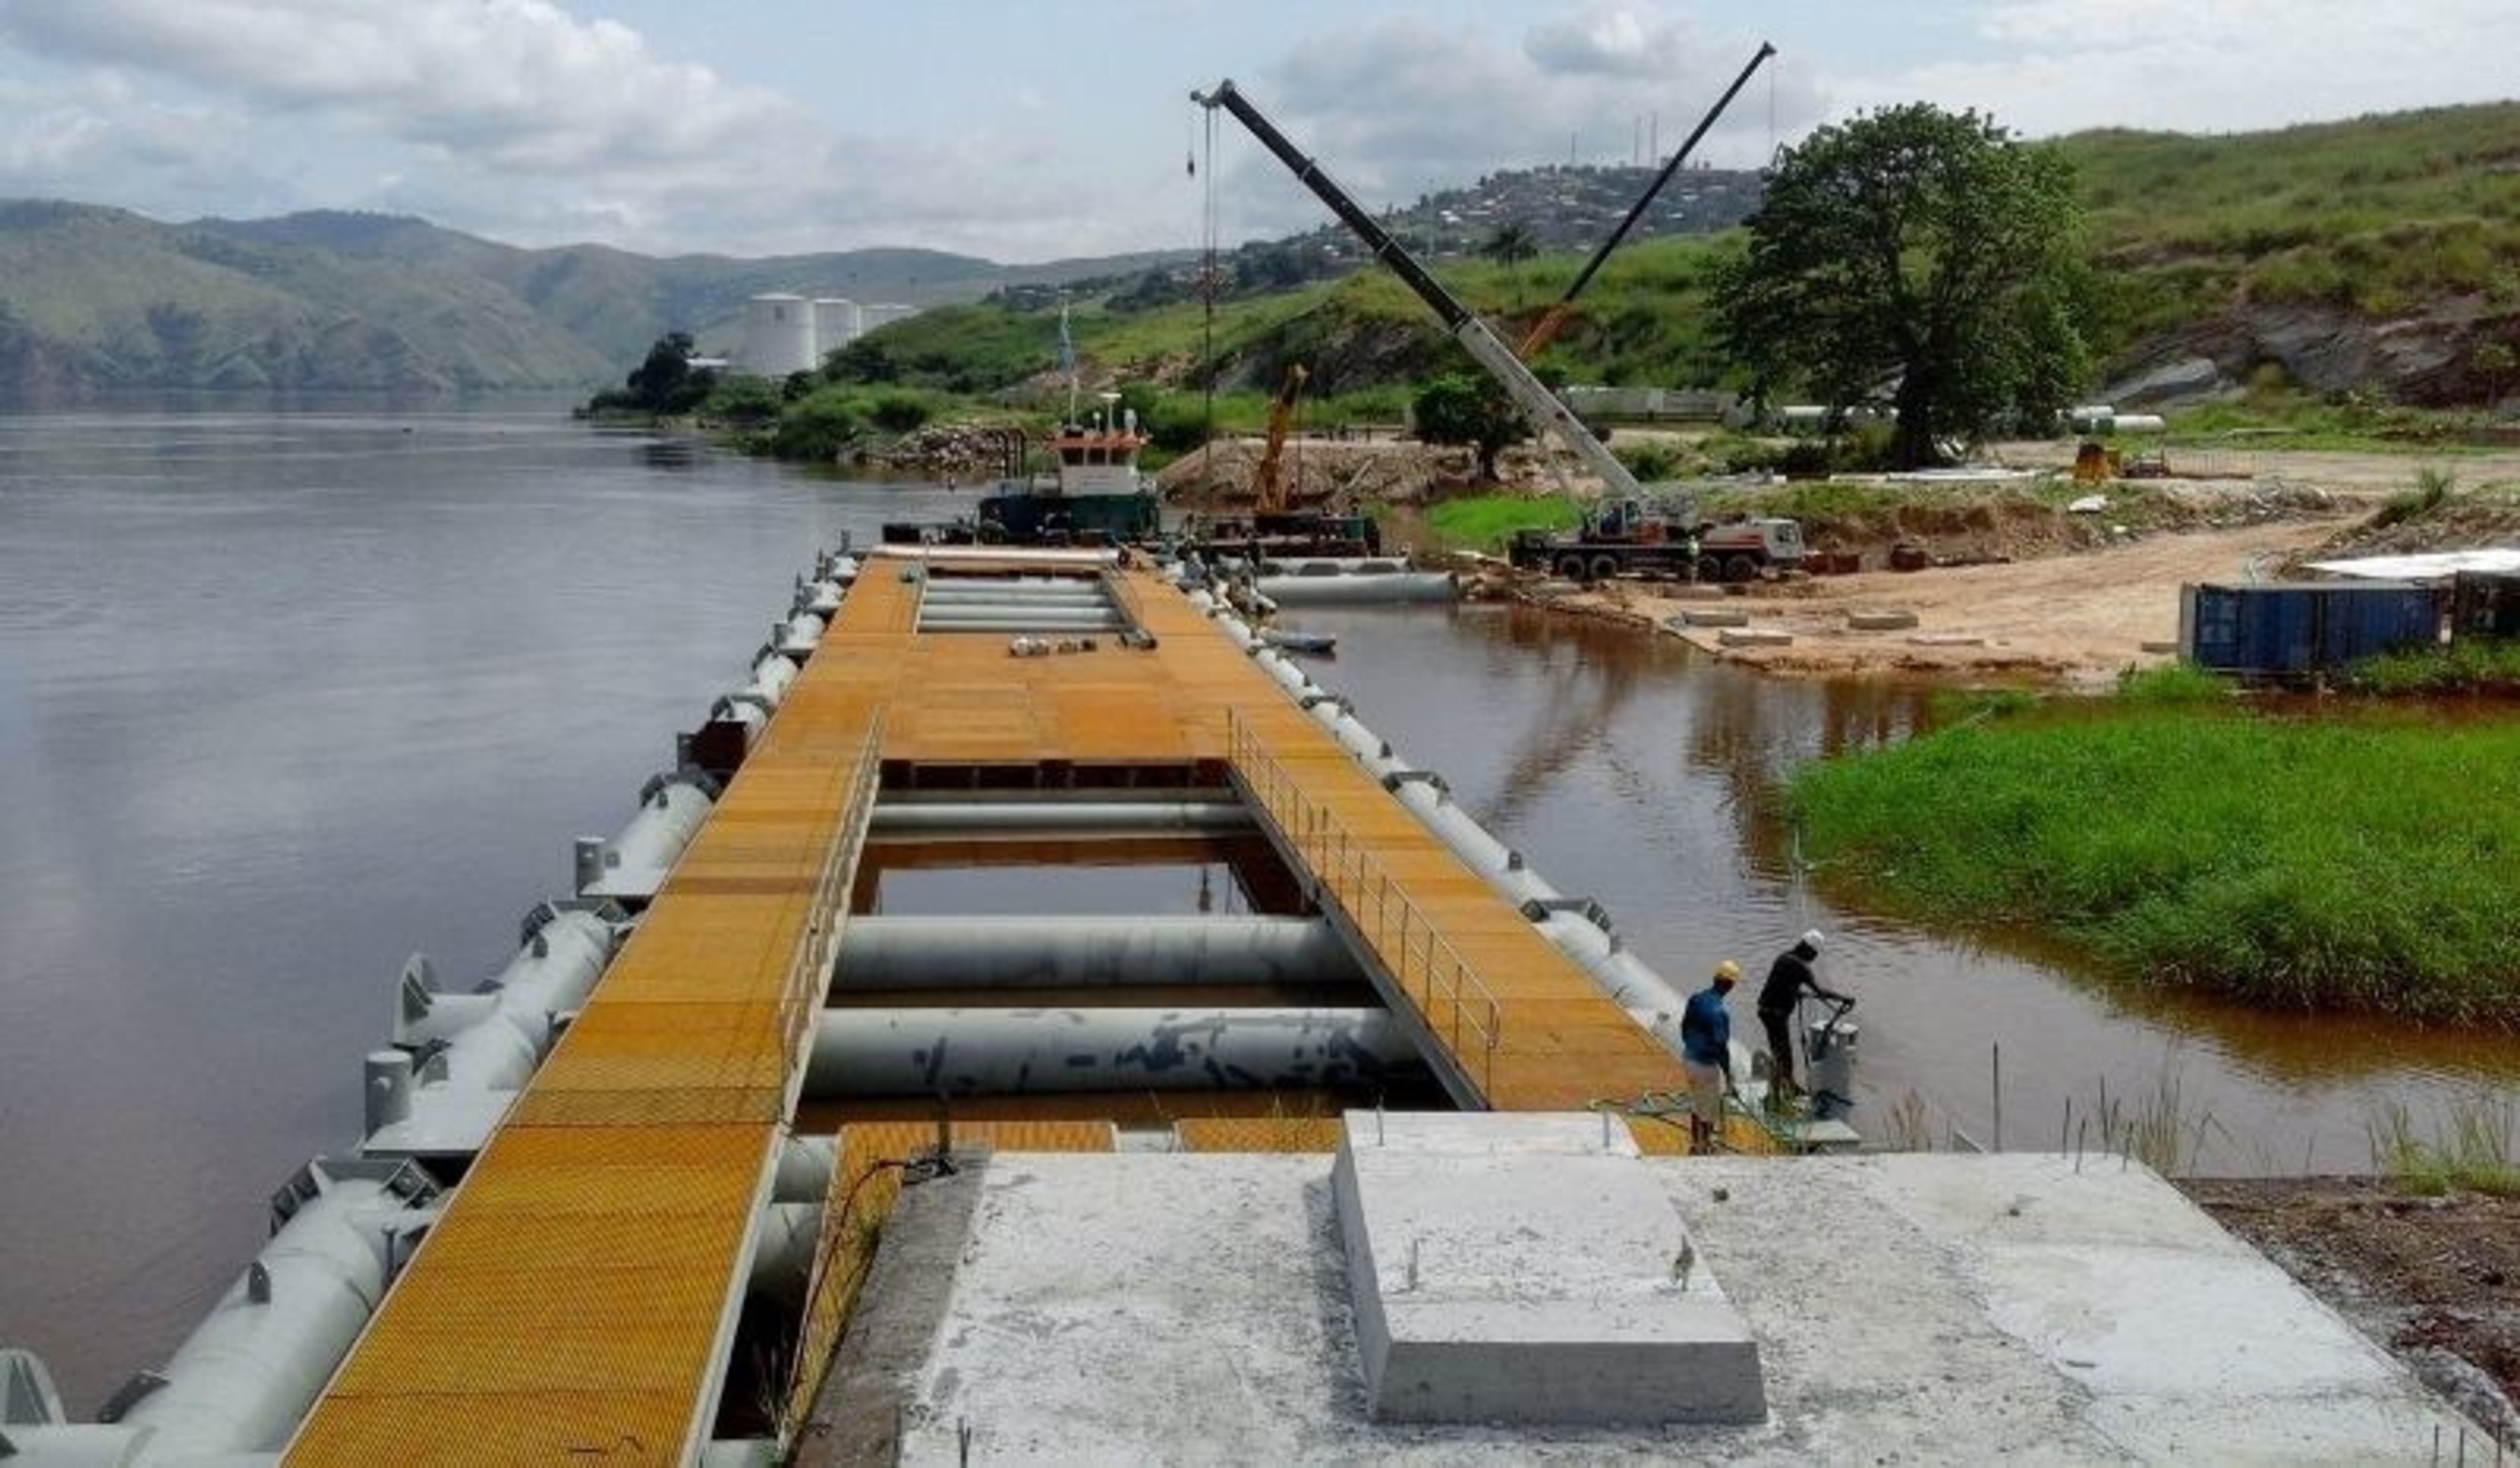 Puma Energy's 99th terminal and image of the jetty in the Democratic Republic of Congo. (PRNewsFoto/Puma Energy)